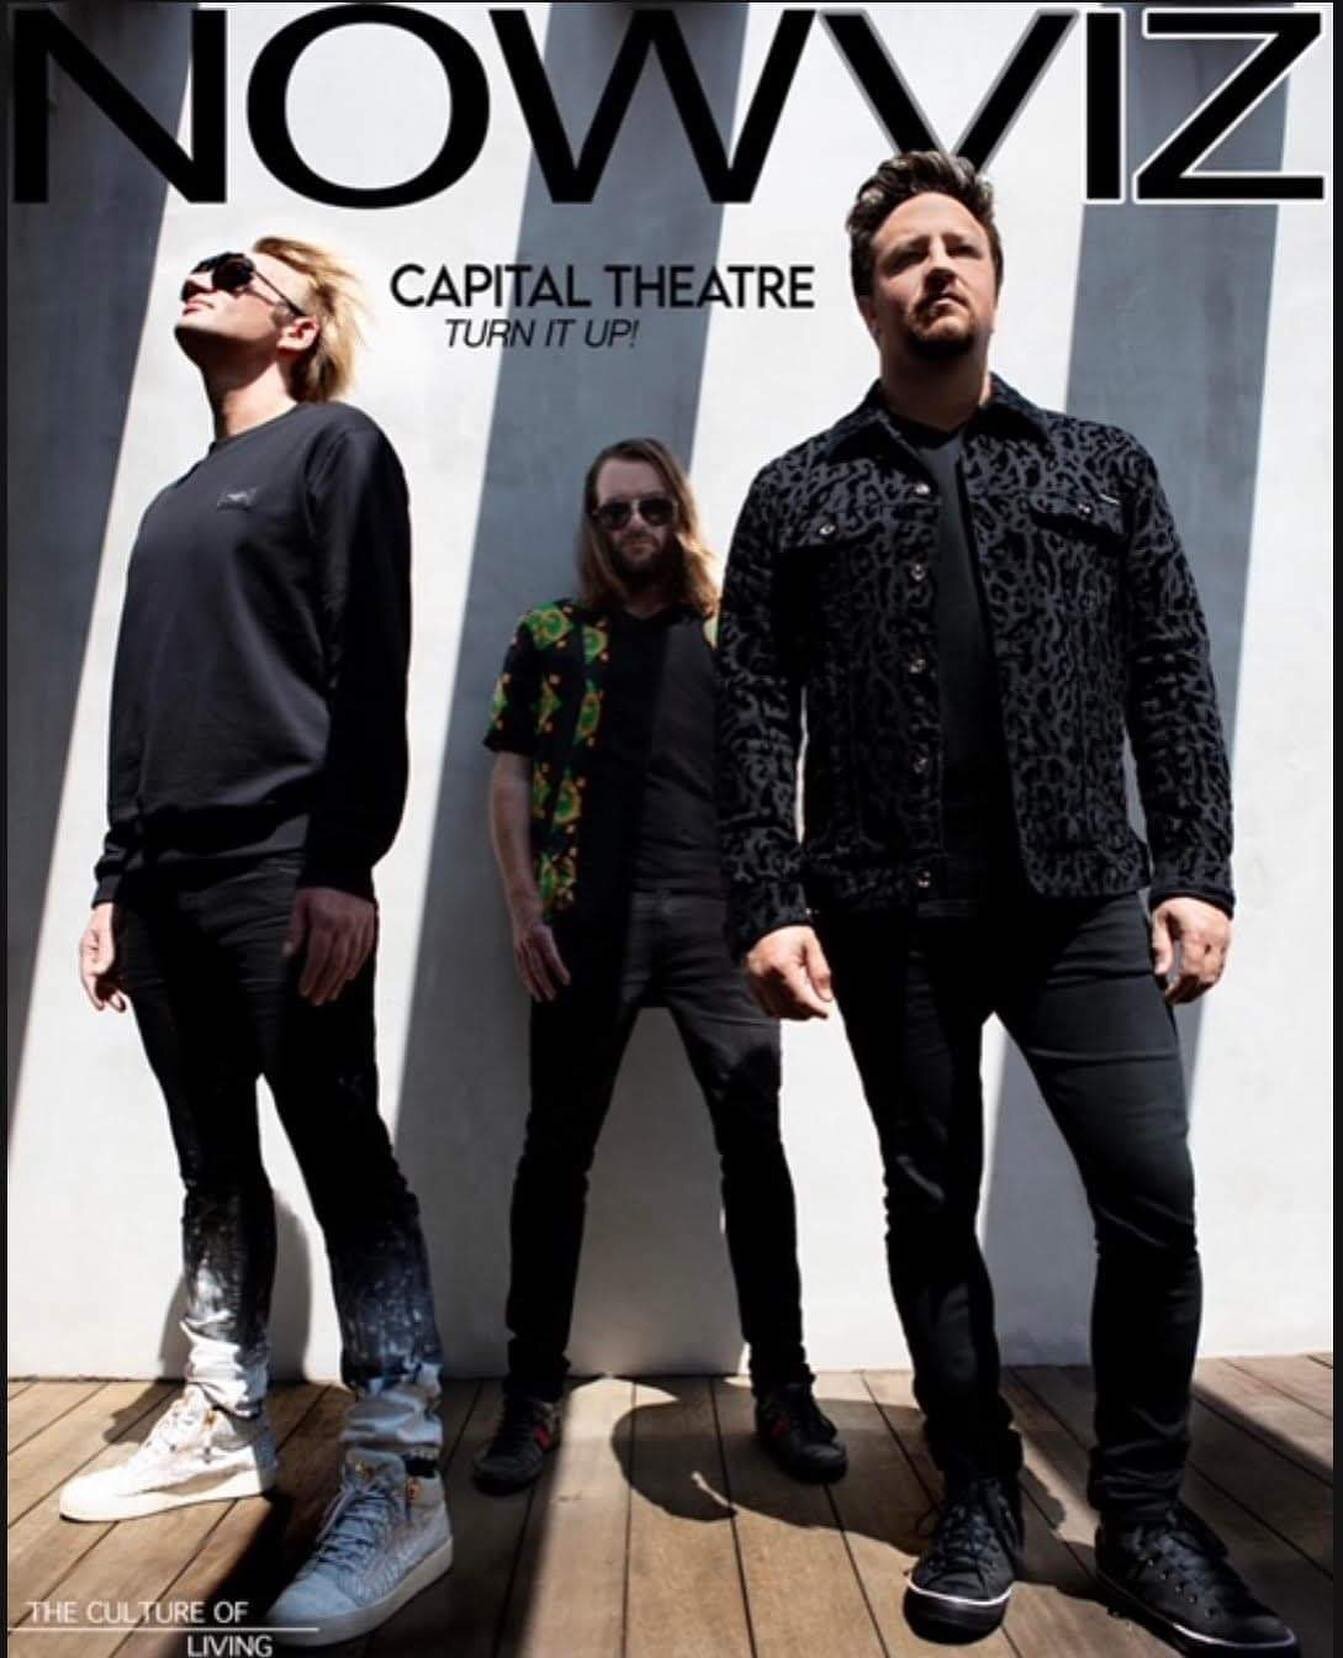 Thank you @nowvizmag for having us on the cover of your latest issue 🤩🙌

-
-
-
-
-
#nowvizmag #nowvizmagazine #music #song #rockband #capitaltheatreband #rockmusic #livemusic #photographer